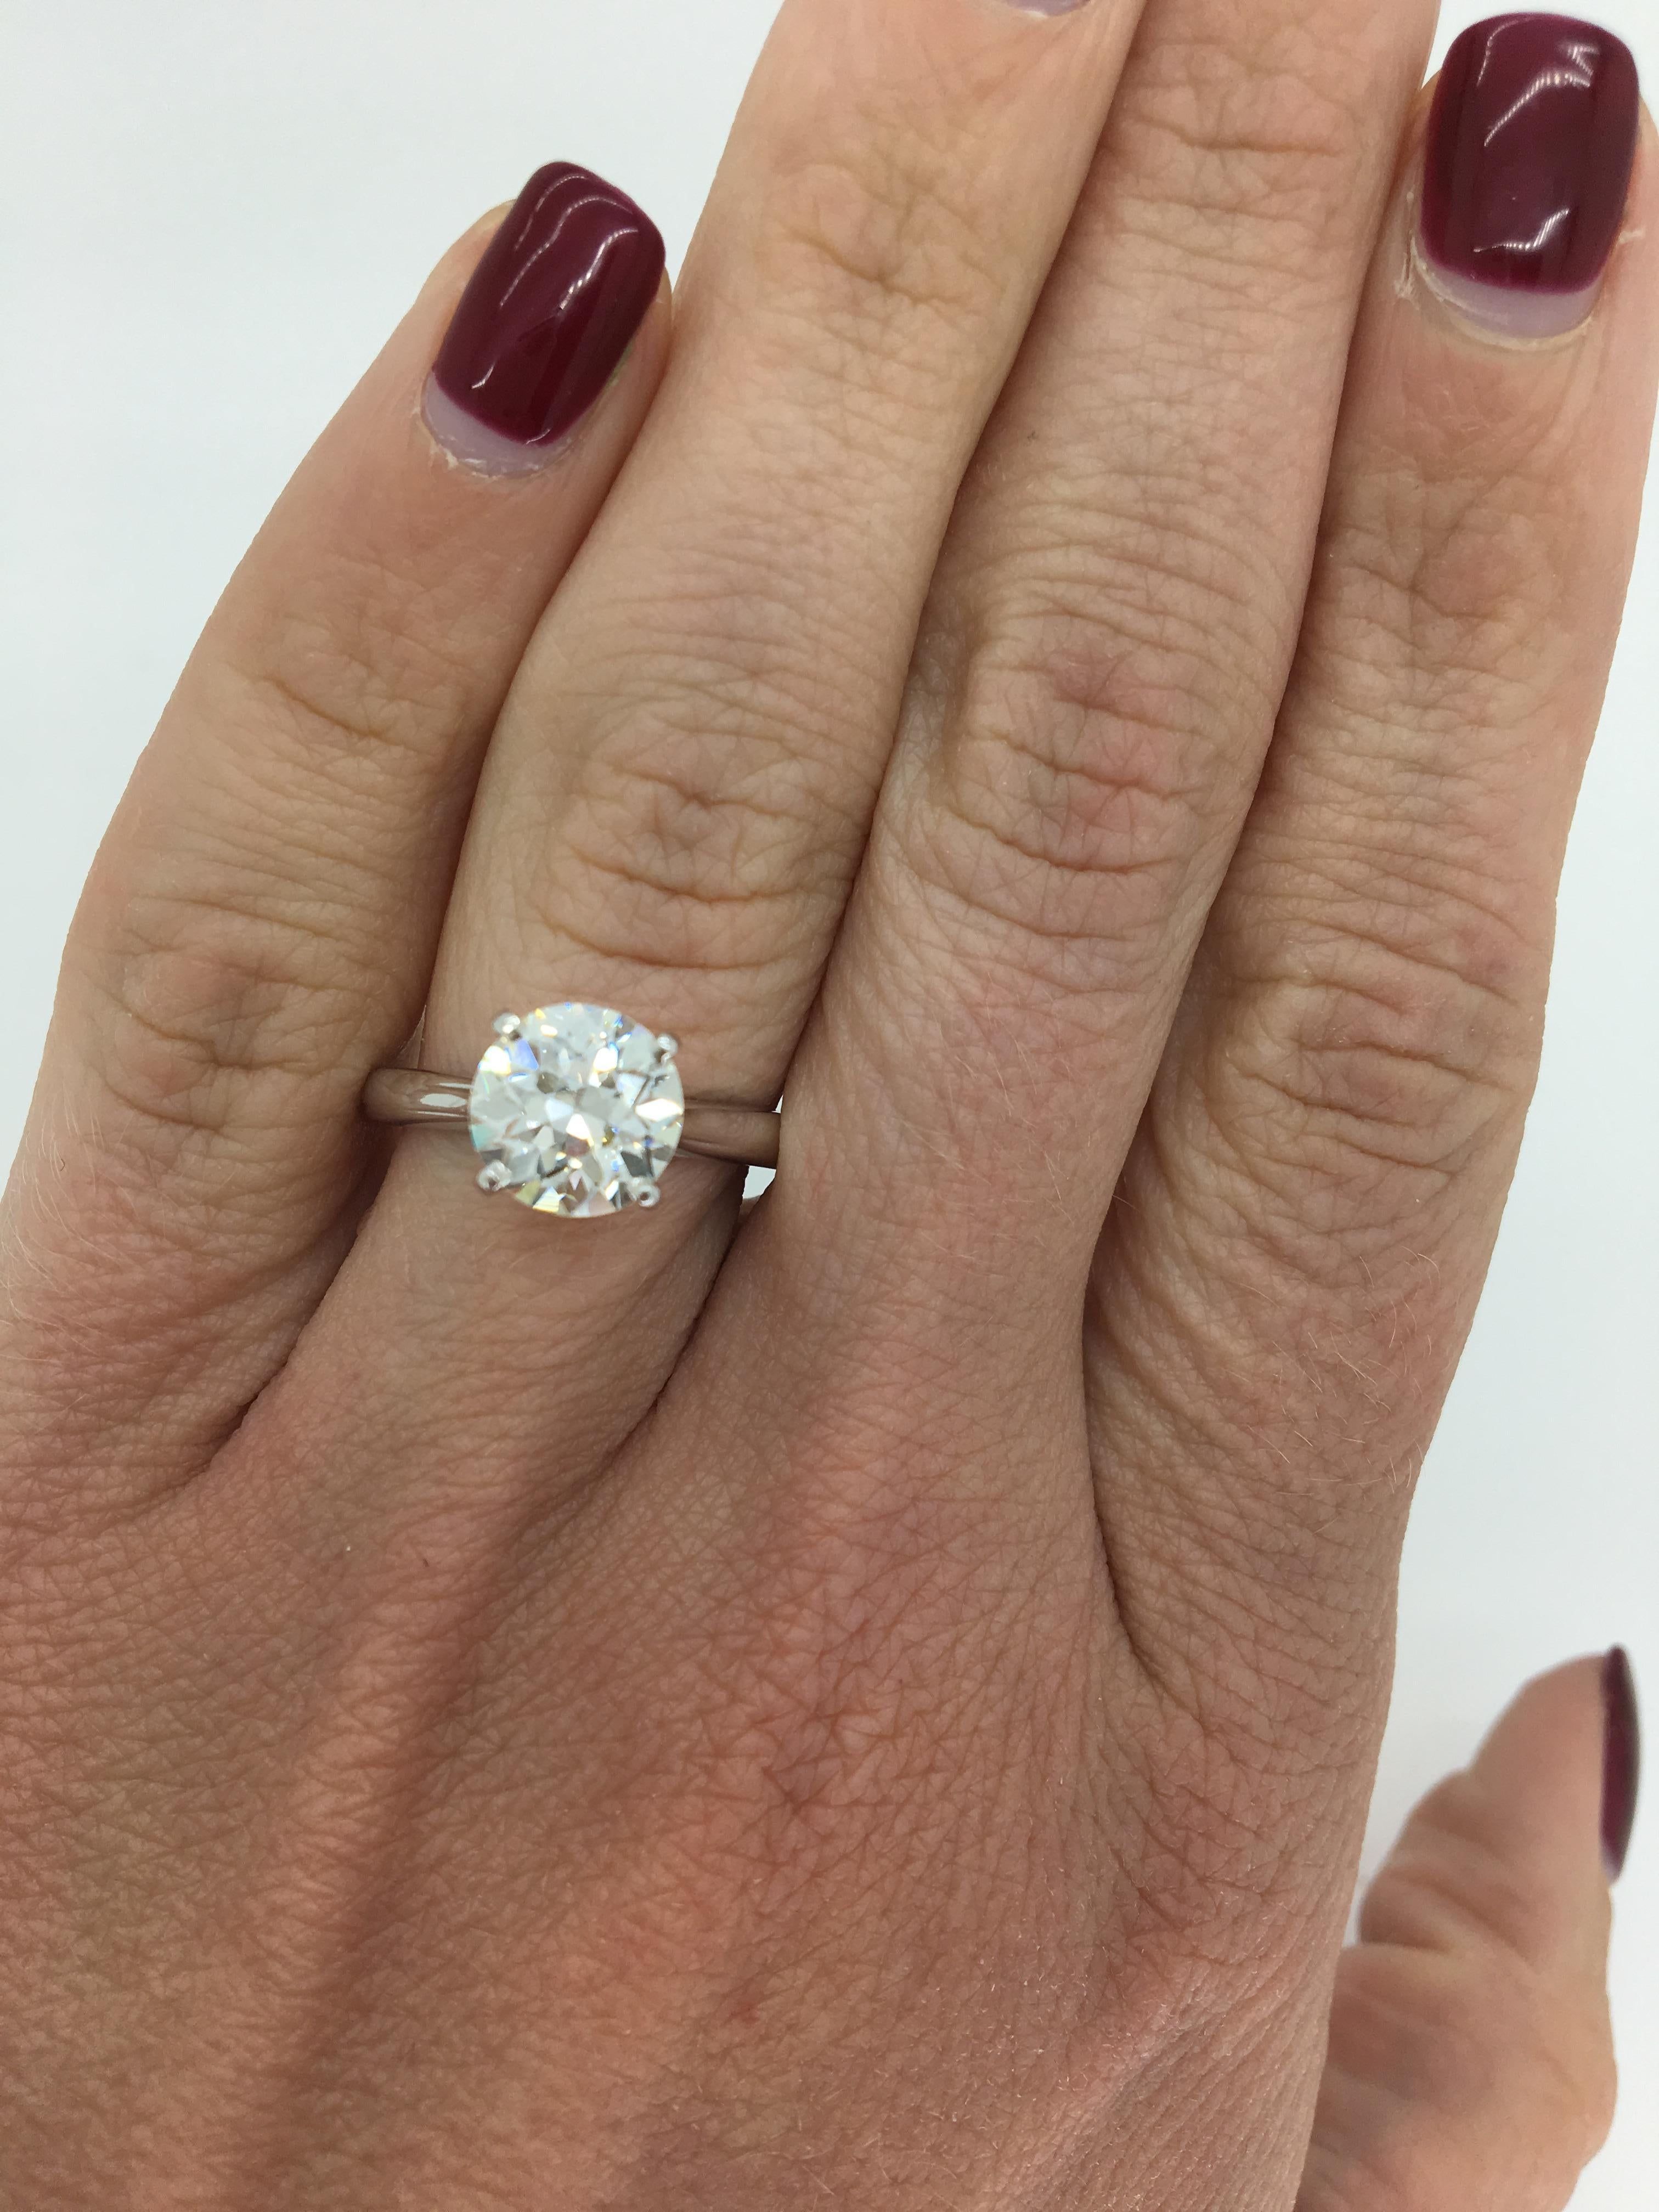 14K White Gold Diamond ring featuring an extravagant 2.22CT Round Transitional cut Diamond solitaire. The Diamond has K color and is SI1 clarity. This beautiful ring is a size 6 and weighs 3.5 grams.